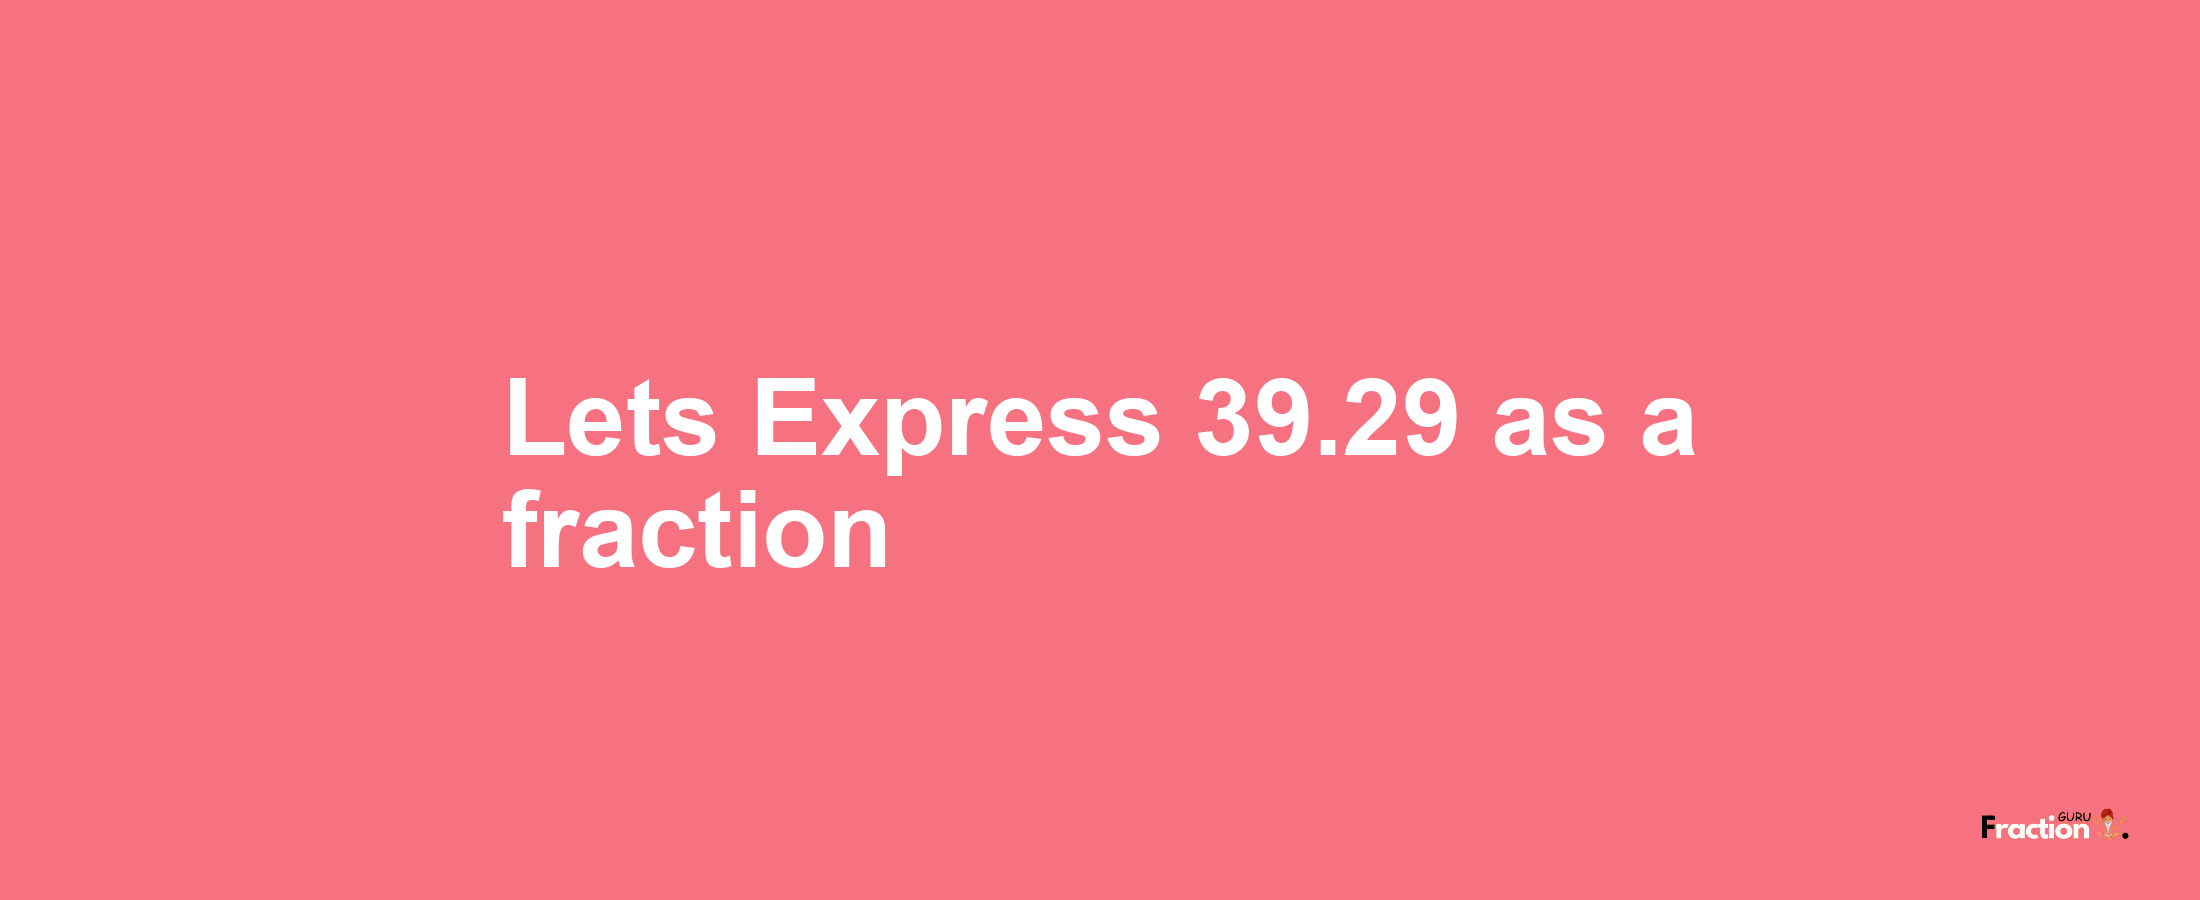 Lets Express 39.29 as afraction